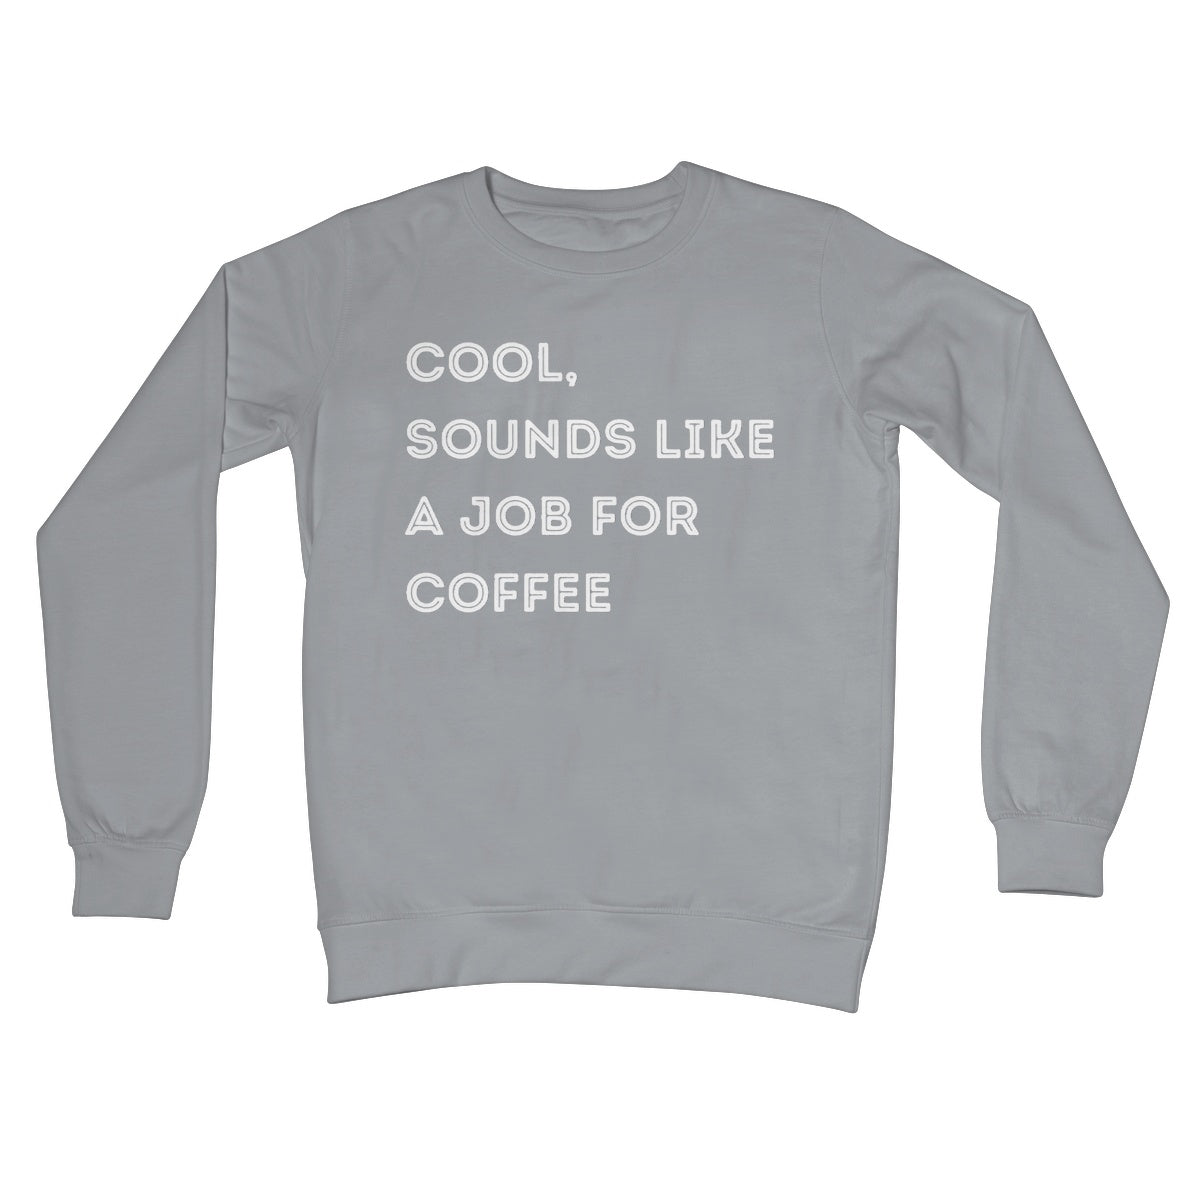 sounds like a job for coffee jumper grey